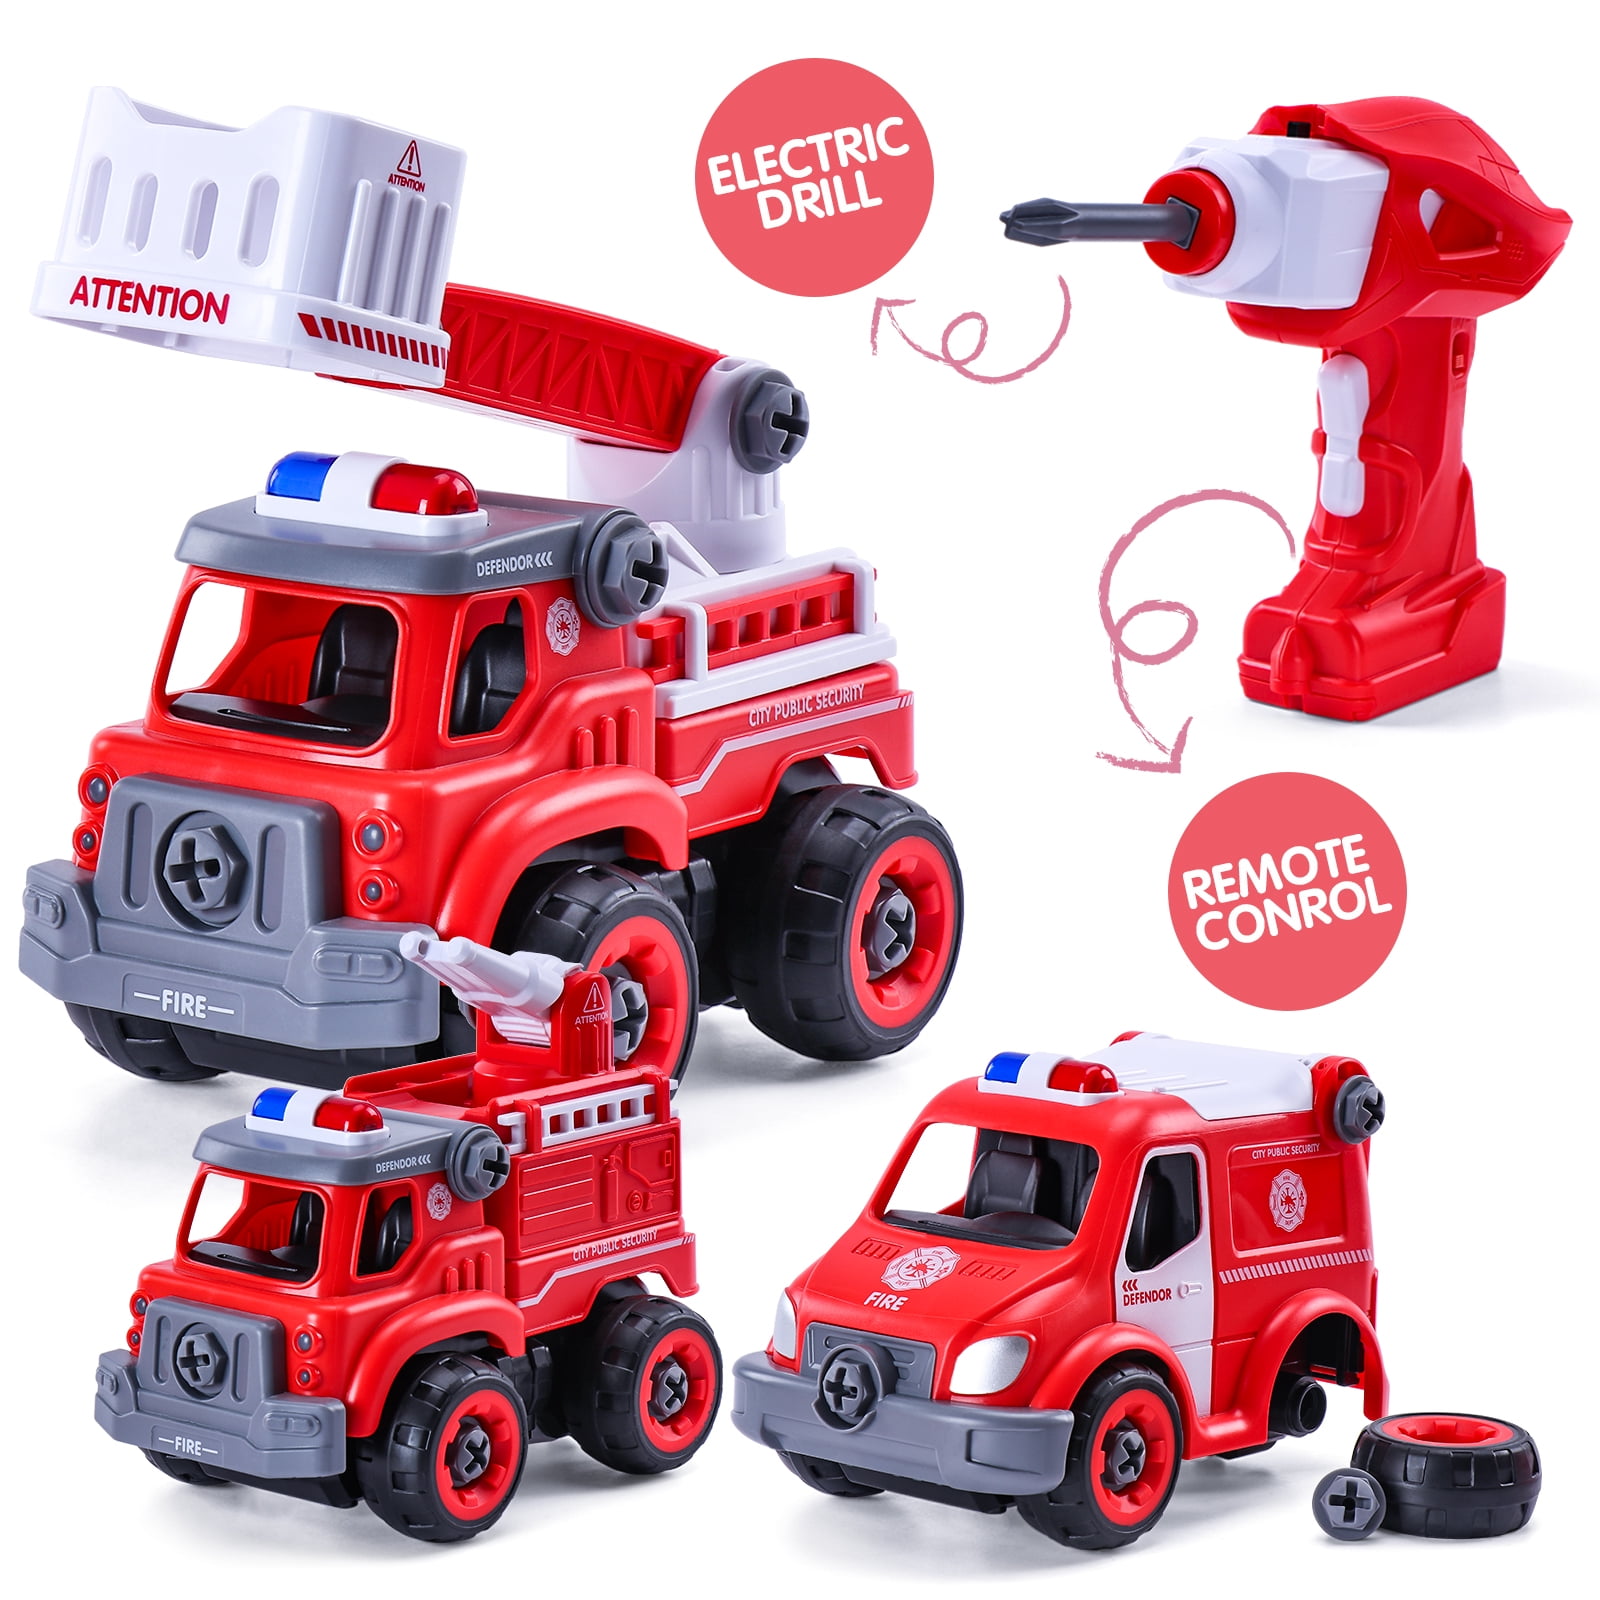 DIY Fire Truck Take Apart Toys-Electric Drill-Converts To Remote Control Car 